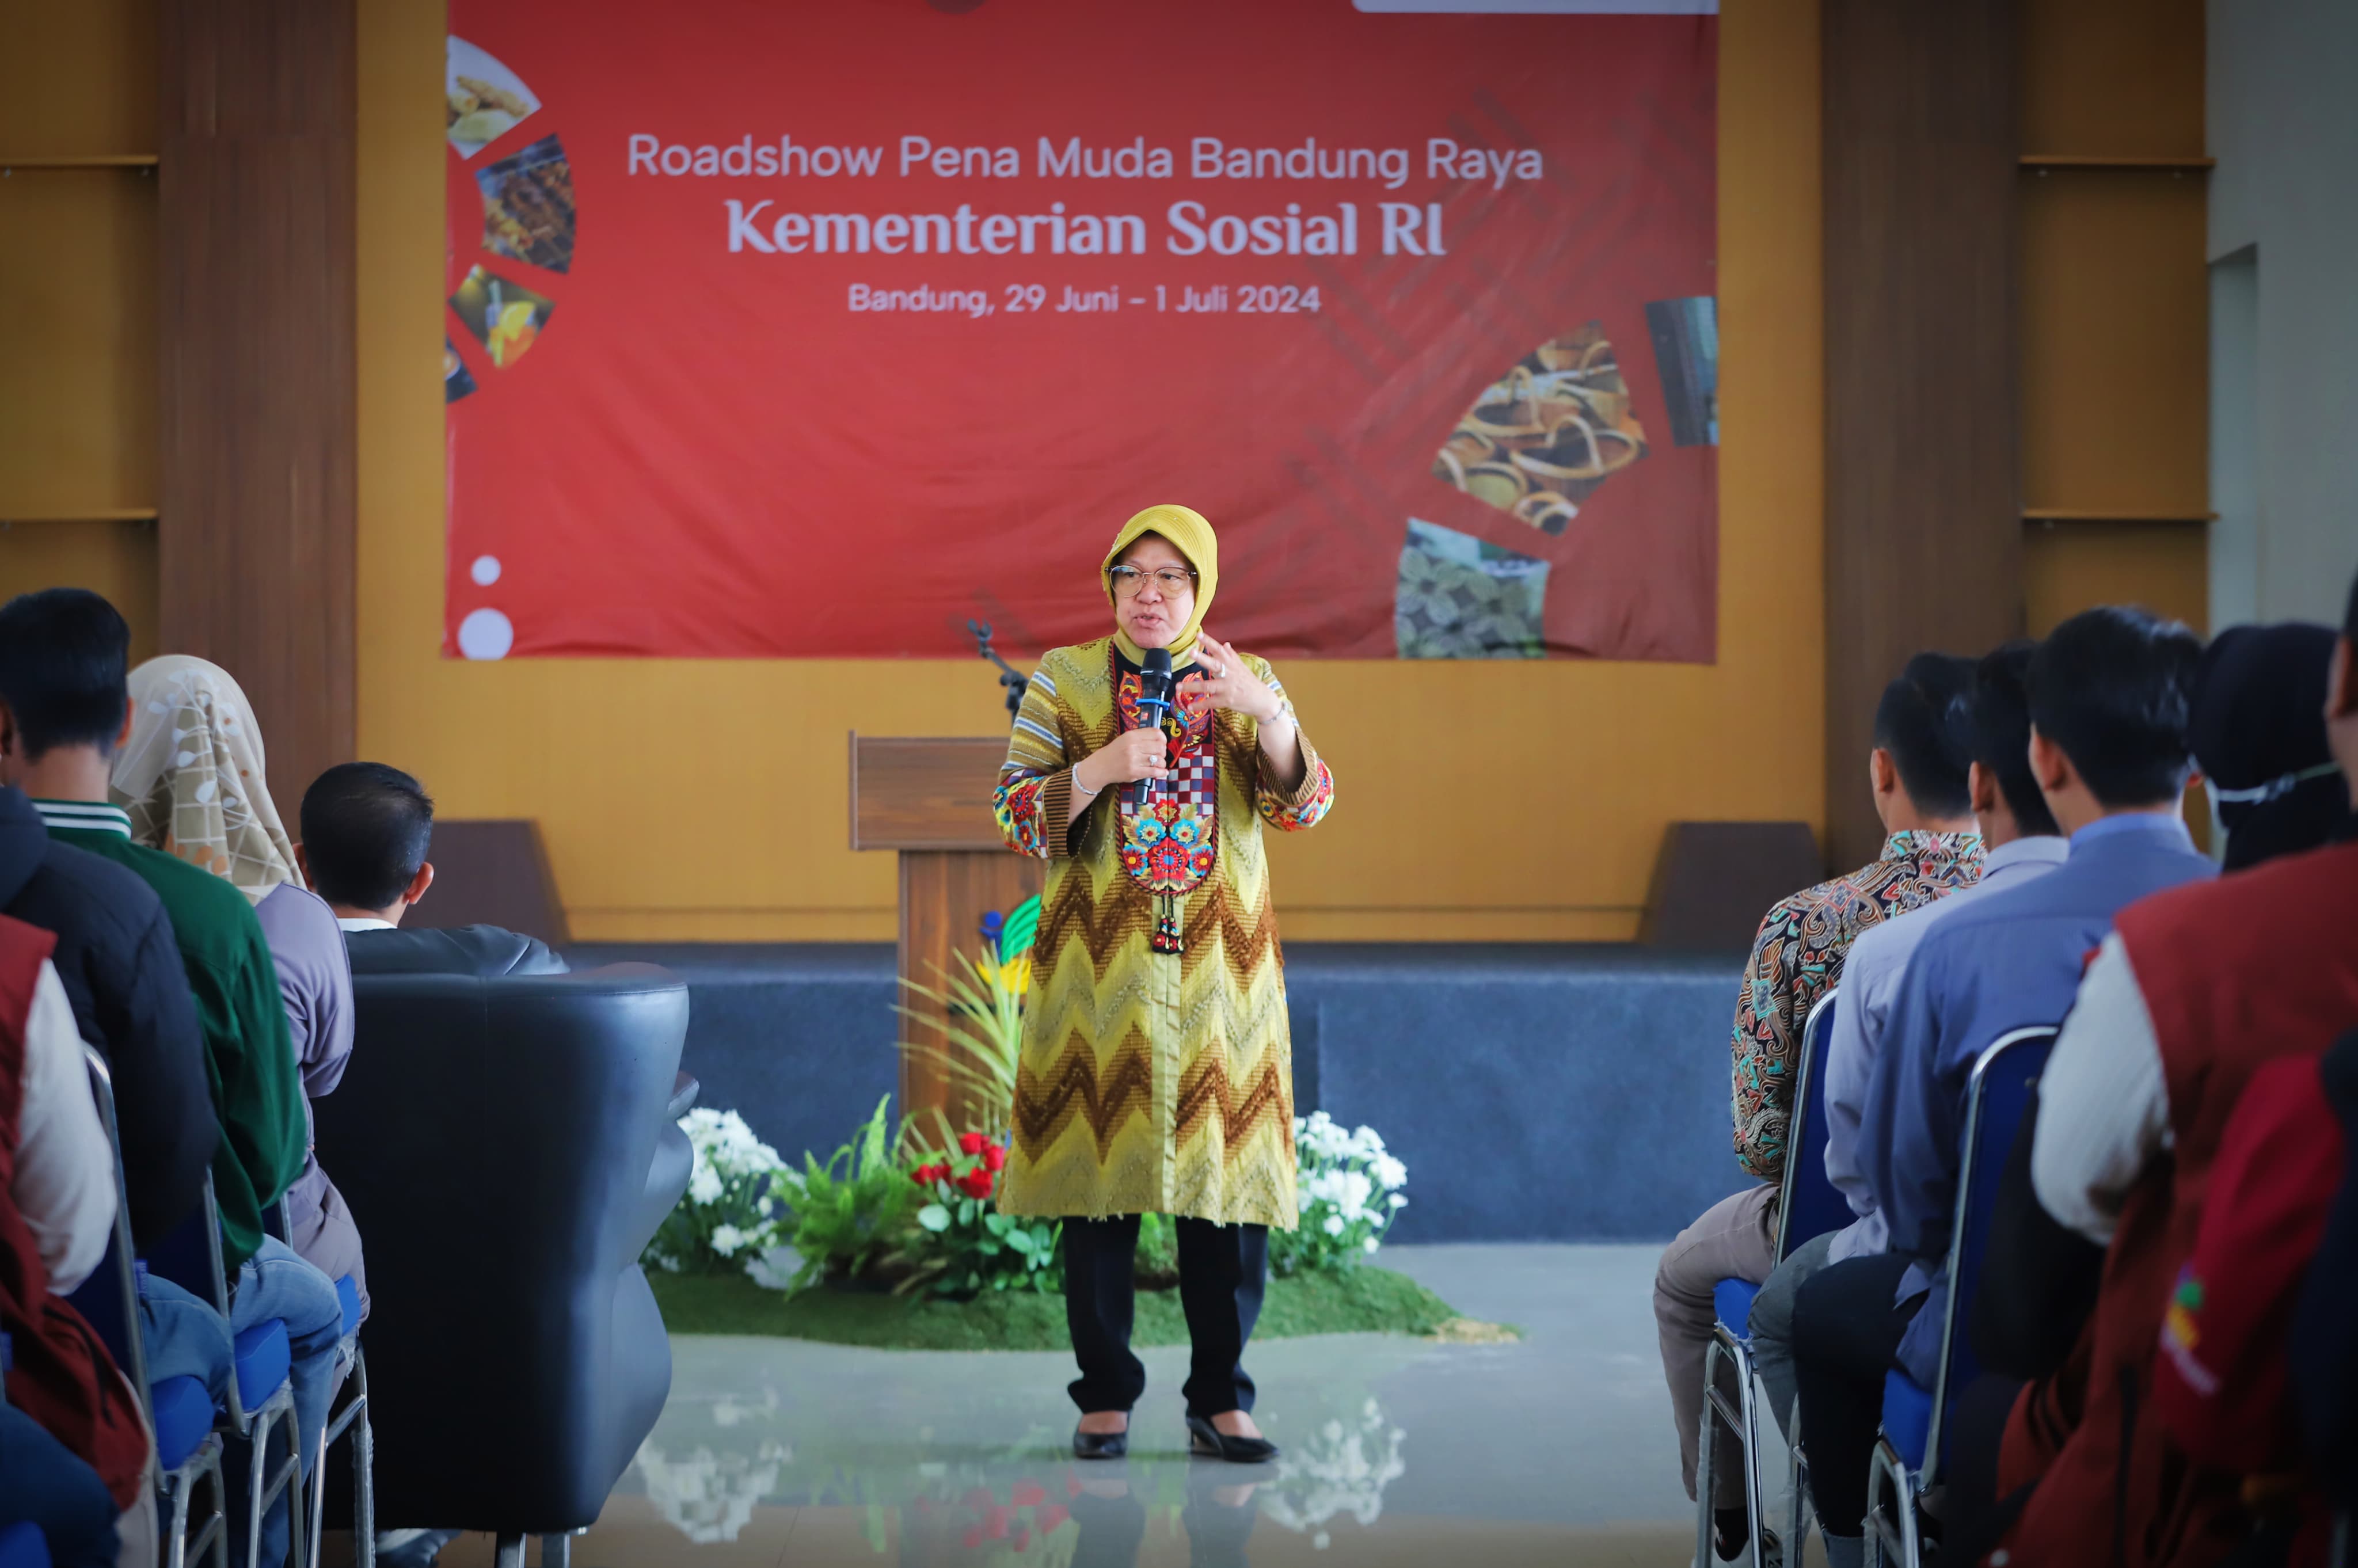 Social Affairs Minister Helps Young People Get Out of Poverty Through PENA Muda